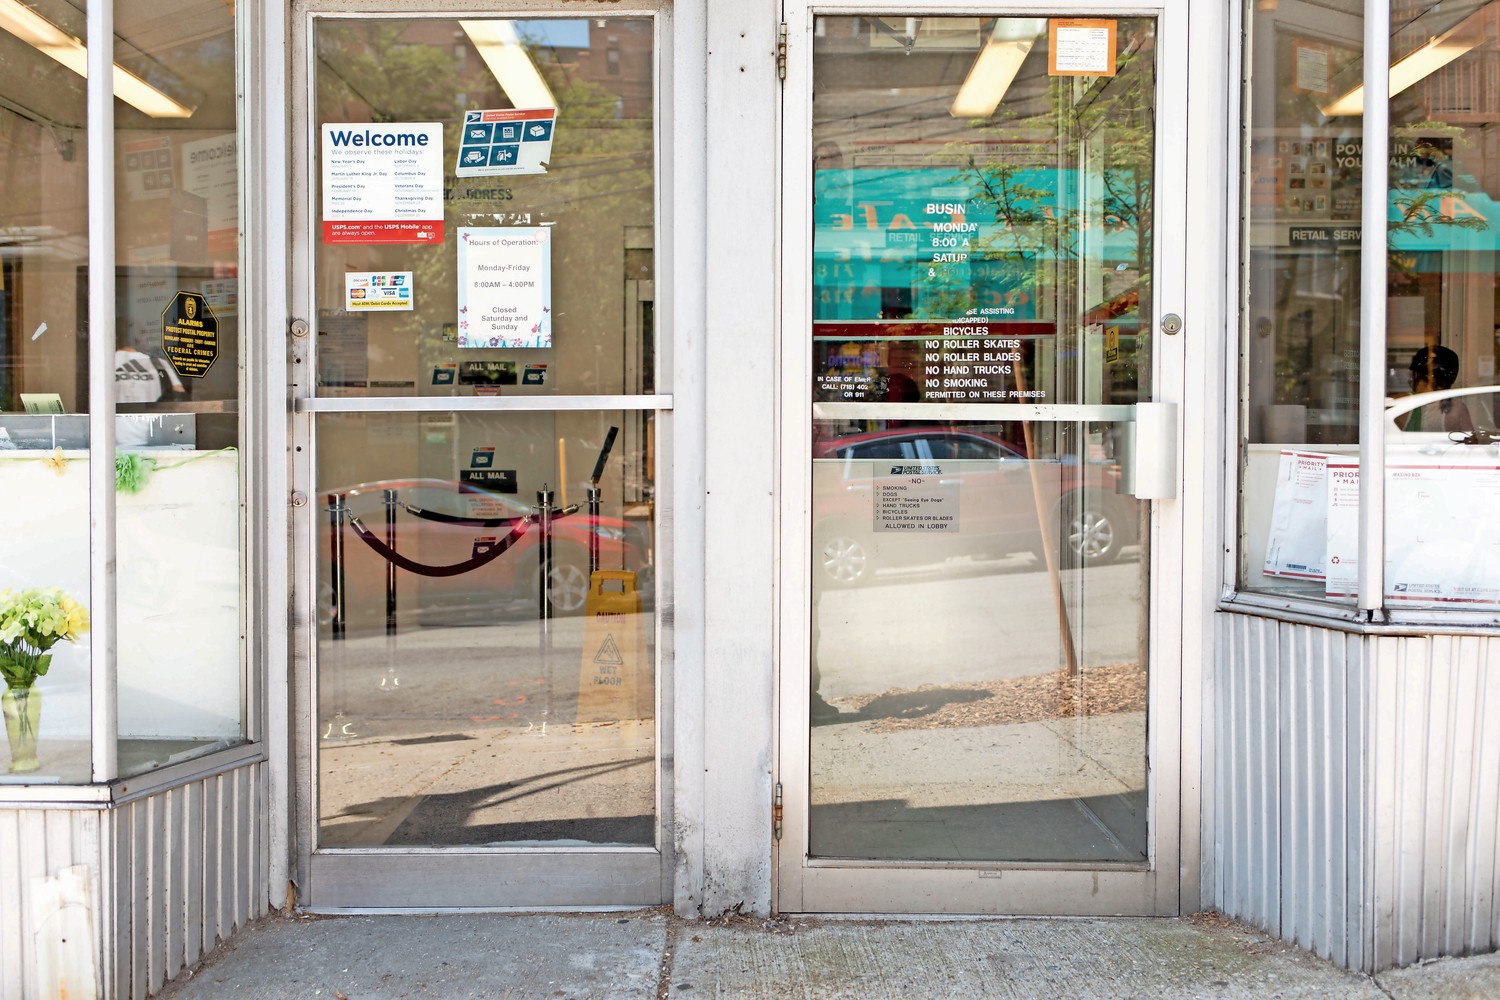 The post office on West 238th Street often suffers from understaffing to the point where the branch has to close for lunch.